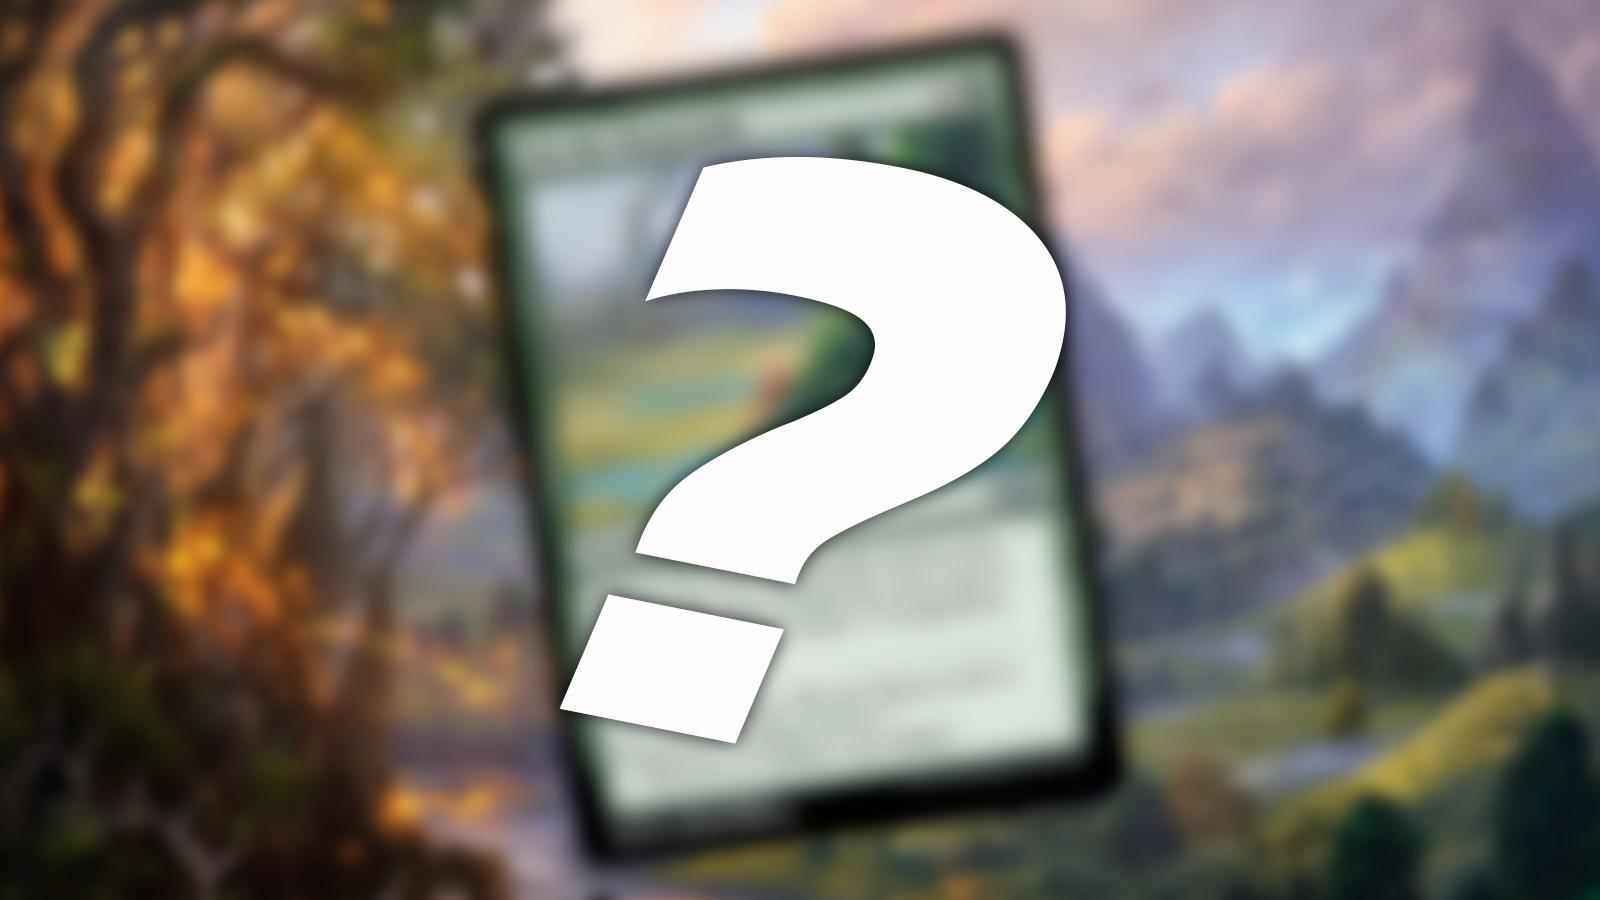 MTG card reveal blurred with a question mark over it